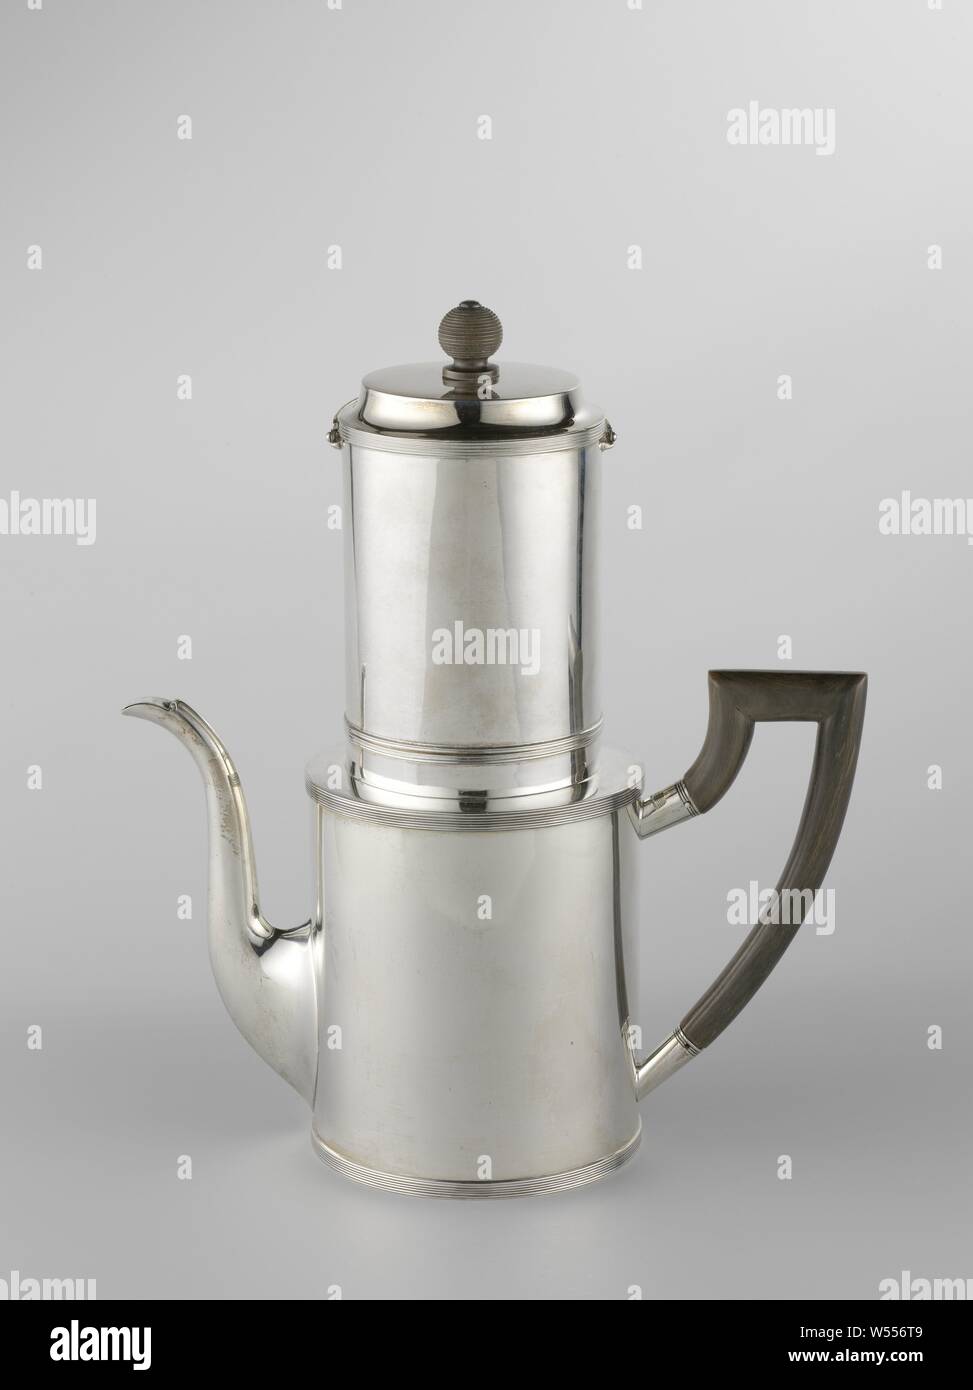 Drip filter coffee pot Coffee filter jug, round, with fillet edges, The cylindrical pot has a flat top with a large round opening, surrounded by a raised wall. The spout is bent S-shaped and has a hinged lip. The leg ear has two right angles at the top and has silver mounts. The cylindrical top piece fits into the opening in the top, the bottom of which has a large number of small holes. It has an arched, hinged handle and is equipped with a loose pusher composed of a slightly curved plate and a conical handle, and with a separate filter consisting of a bottom with large holes, and a straight Stock Photo